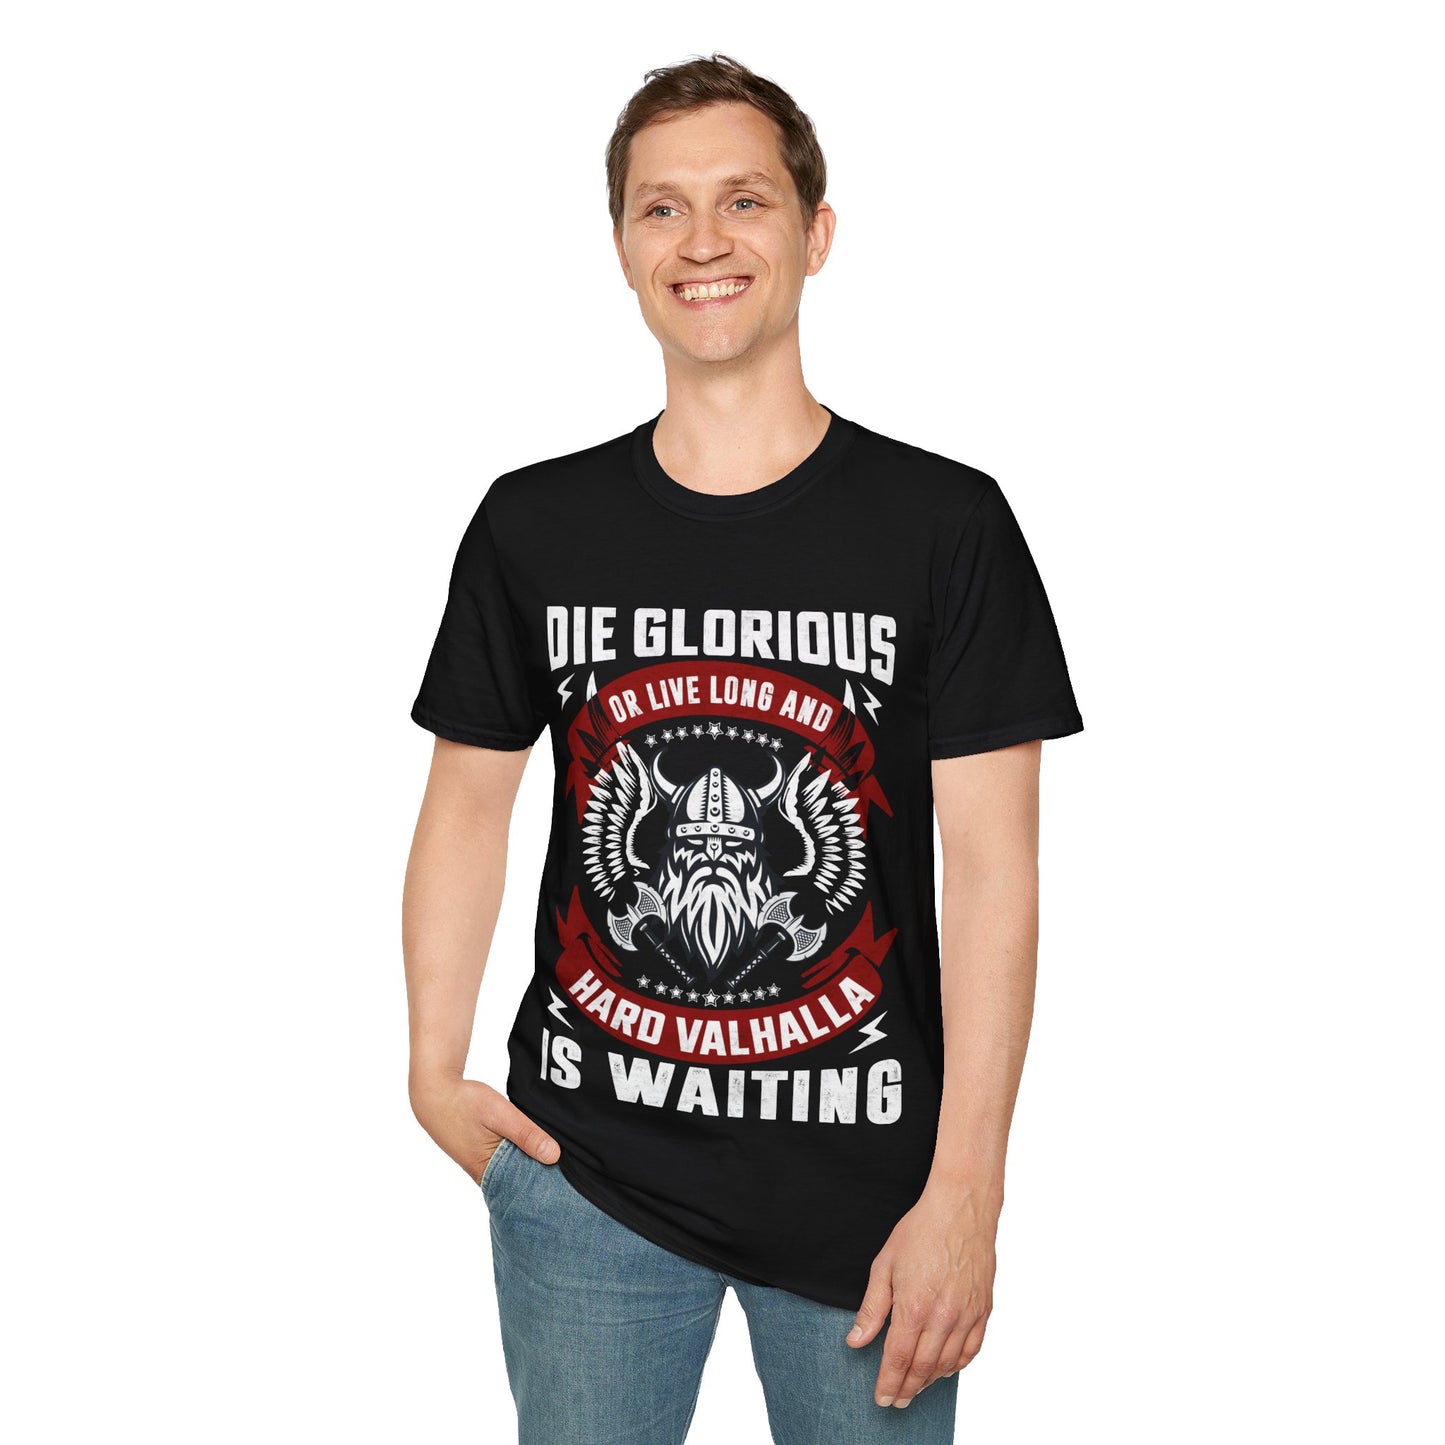 Die Glorious Or Live Long And Hard Valhalla Is Waiting T-Shirt